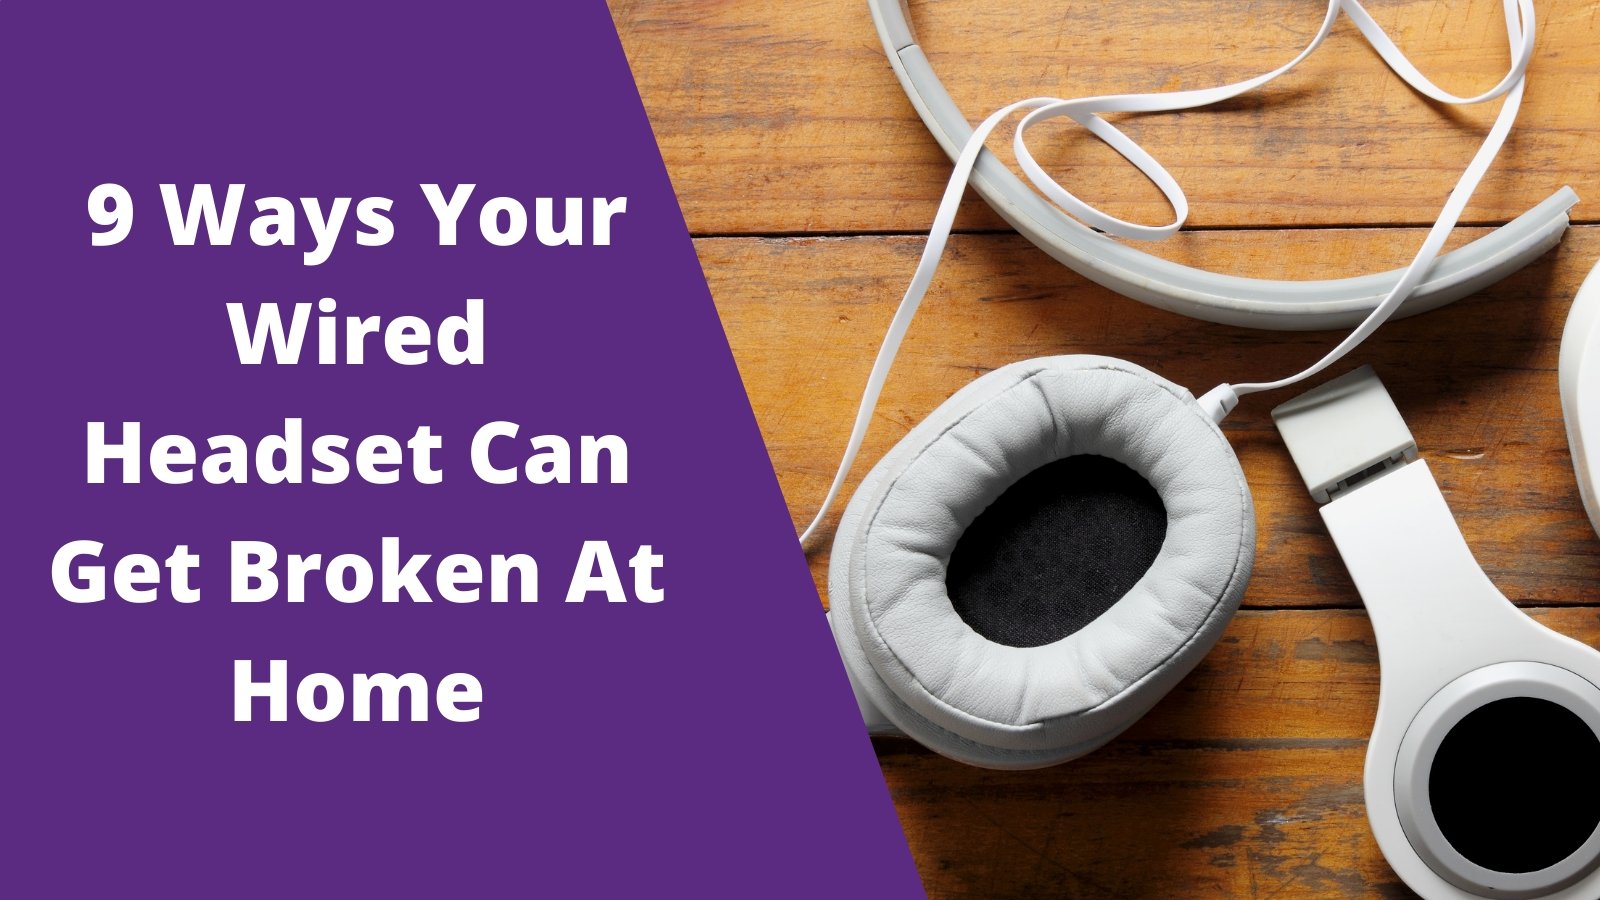 9 Ways Your Wired Headset Can Get Broken At Home - Headset Advisor